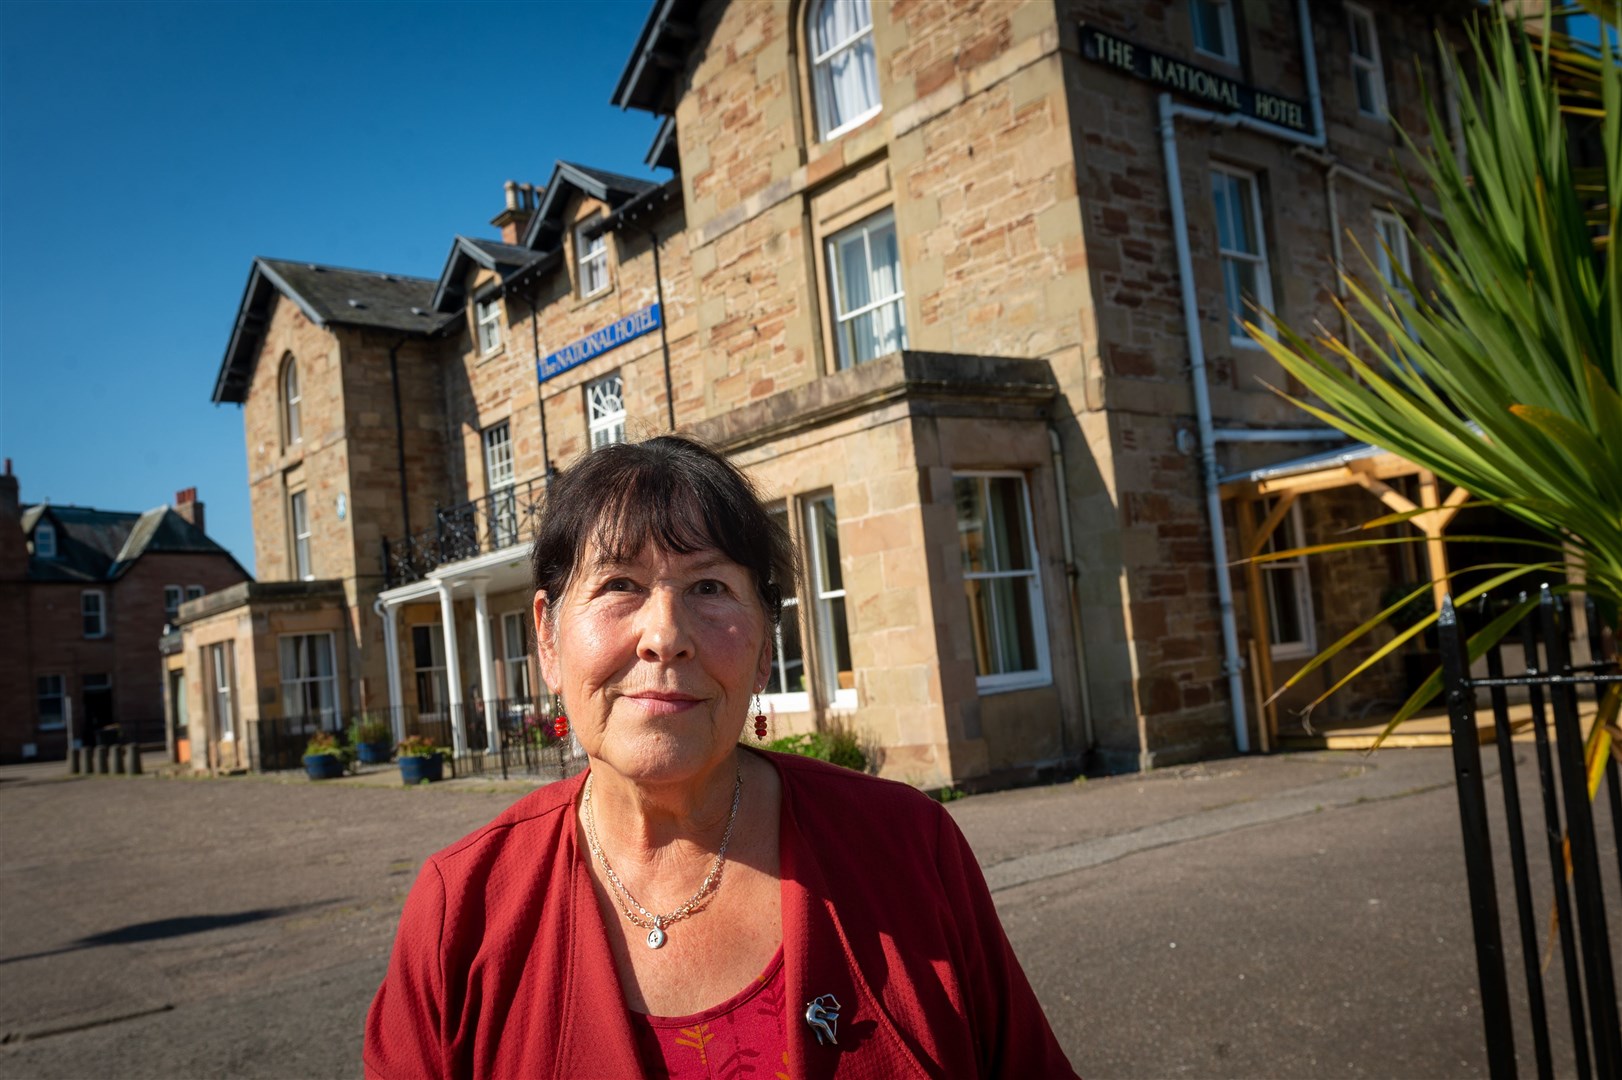 Councillor Margaret Paterson had previously criticised plans to turn The National into a residential care home but this week welcomed news of the revamp.